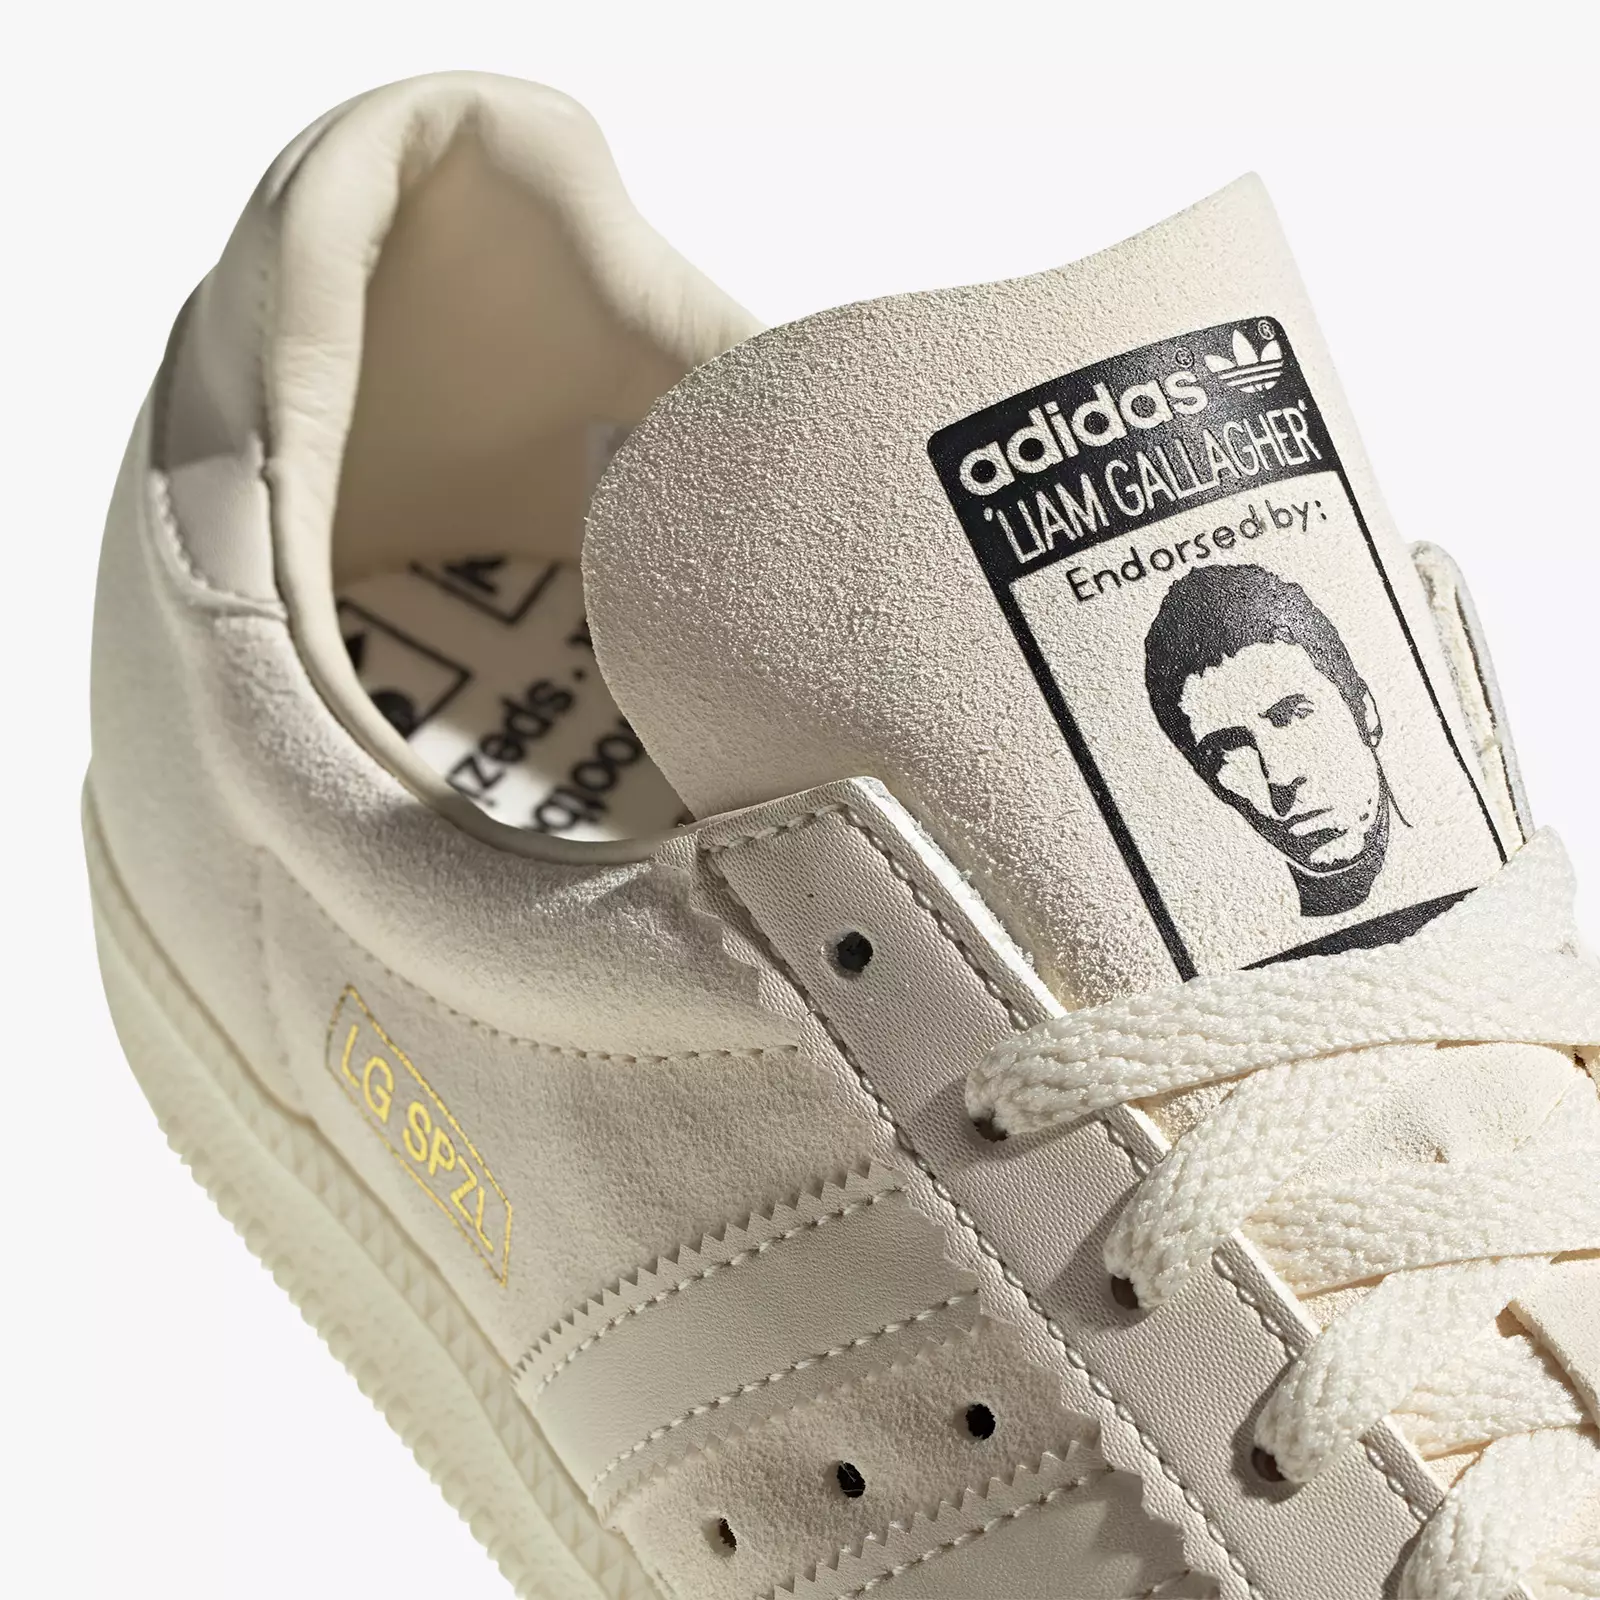 The Trainers Feature Liam Gallagher On The Tongue.